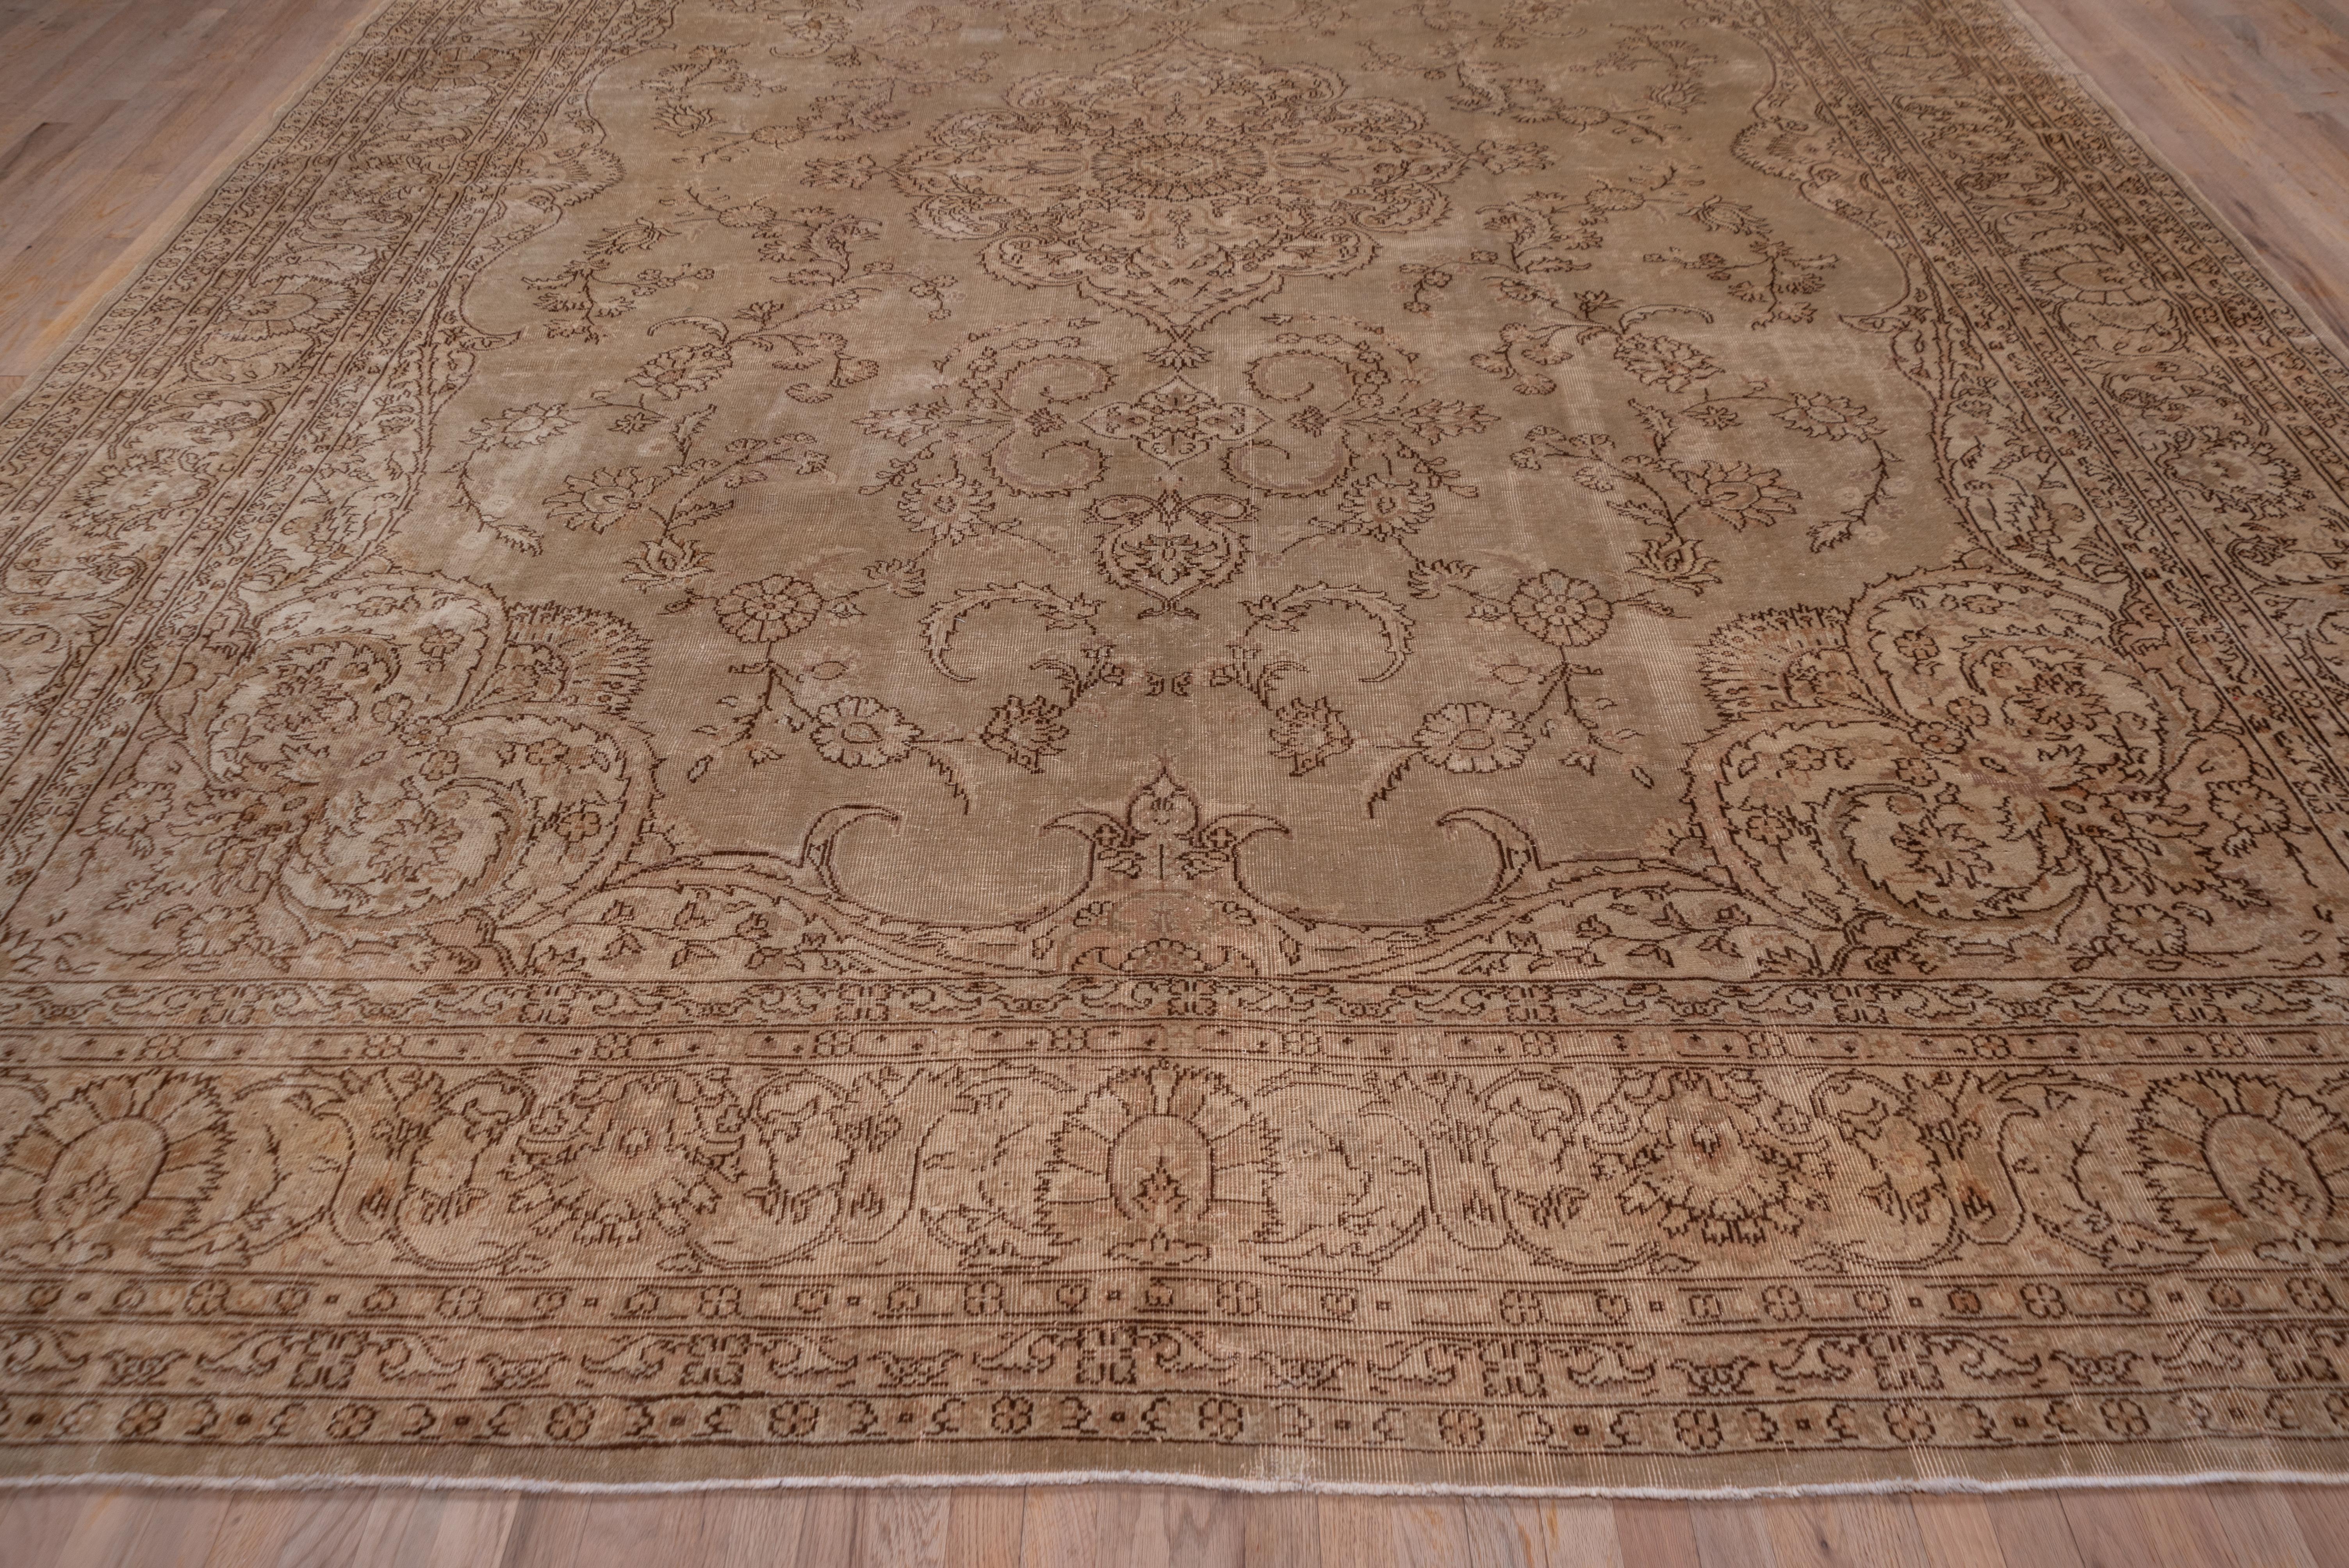 This east Turkish workshop carpet has a brown outlined pattern in the tan field of a pendant medallion and palmette arabesques and very split leaf corners. The beige border displays two palmette types and fat acanthus leaves.